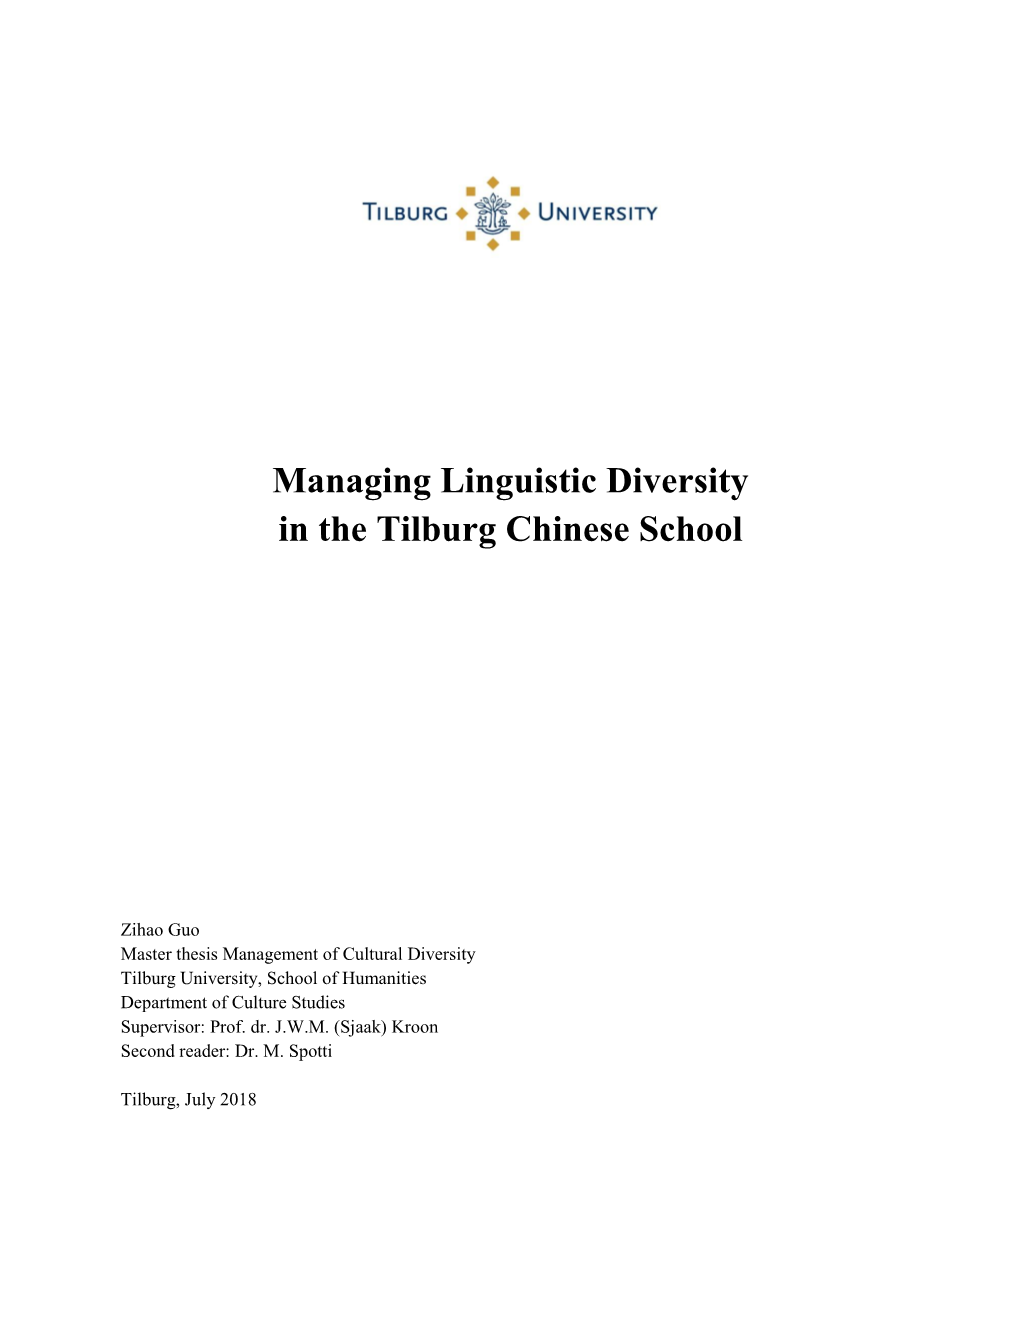 Managing Linguistic Diversity in the Tilburg Chinese School